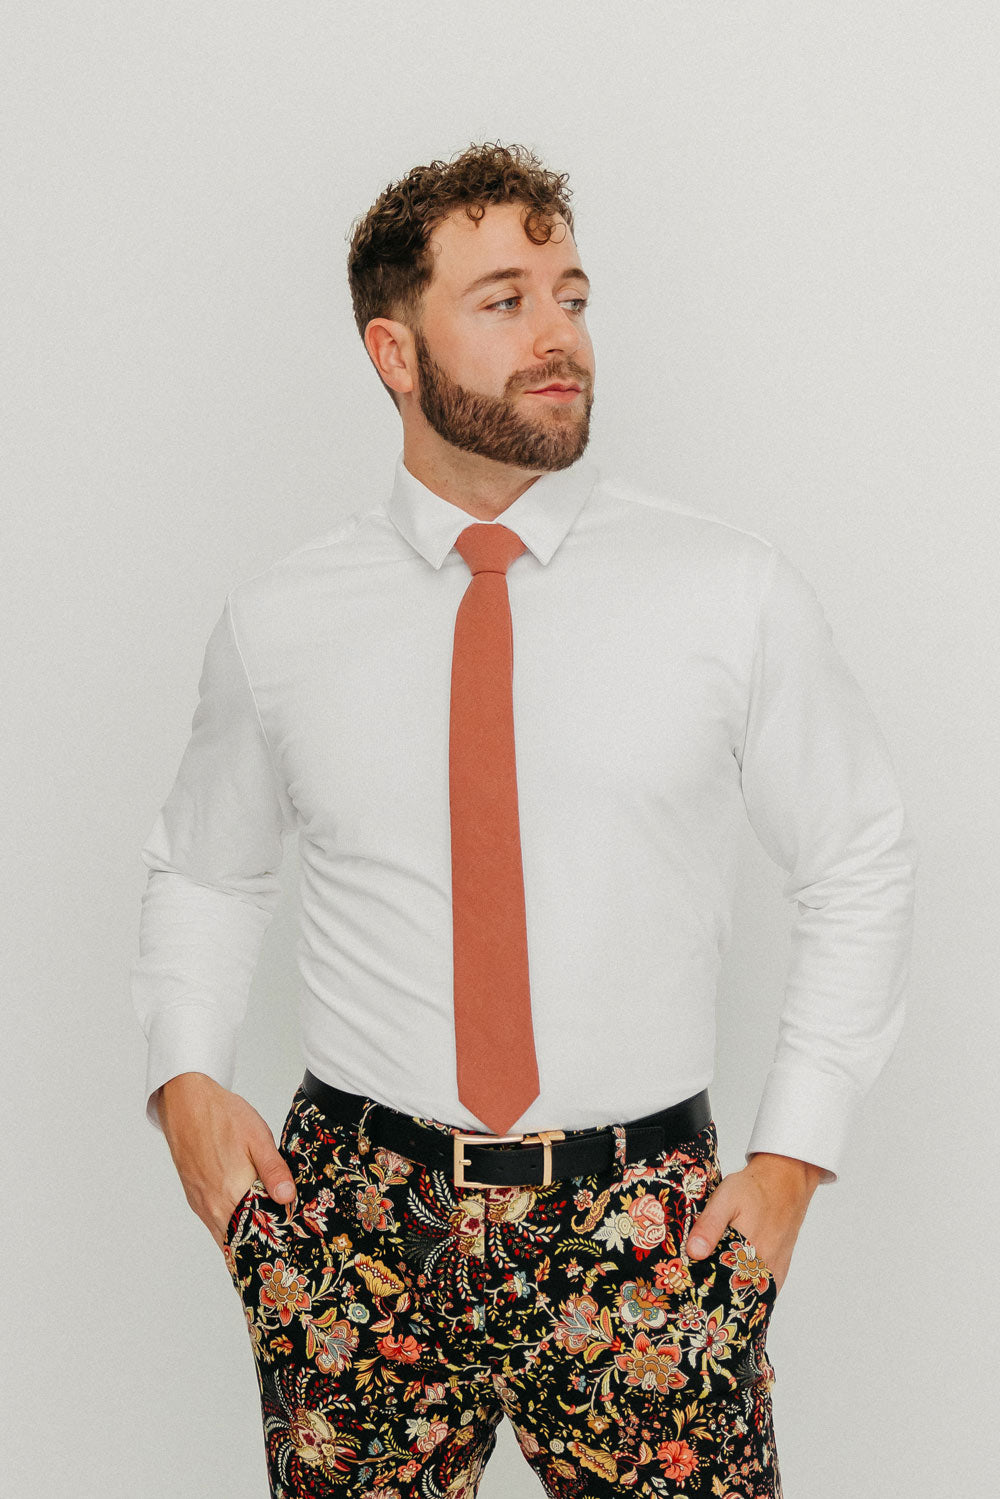 Sedona tie worn with a white shirt, black belt and floral pants.